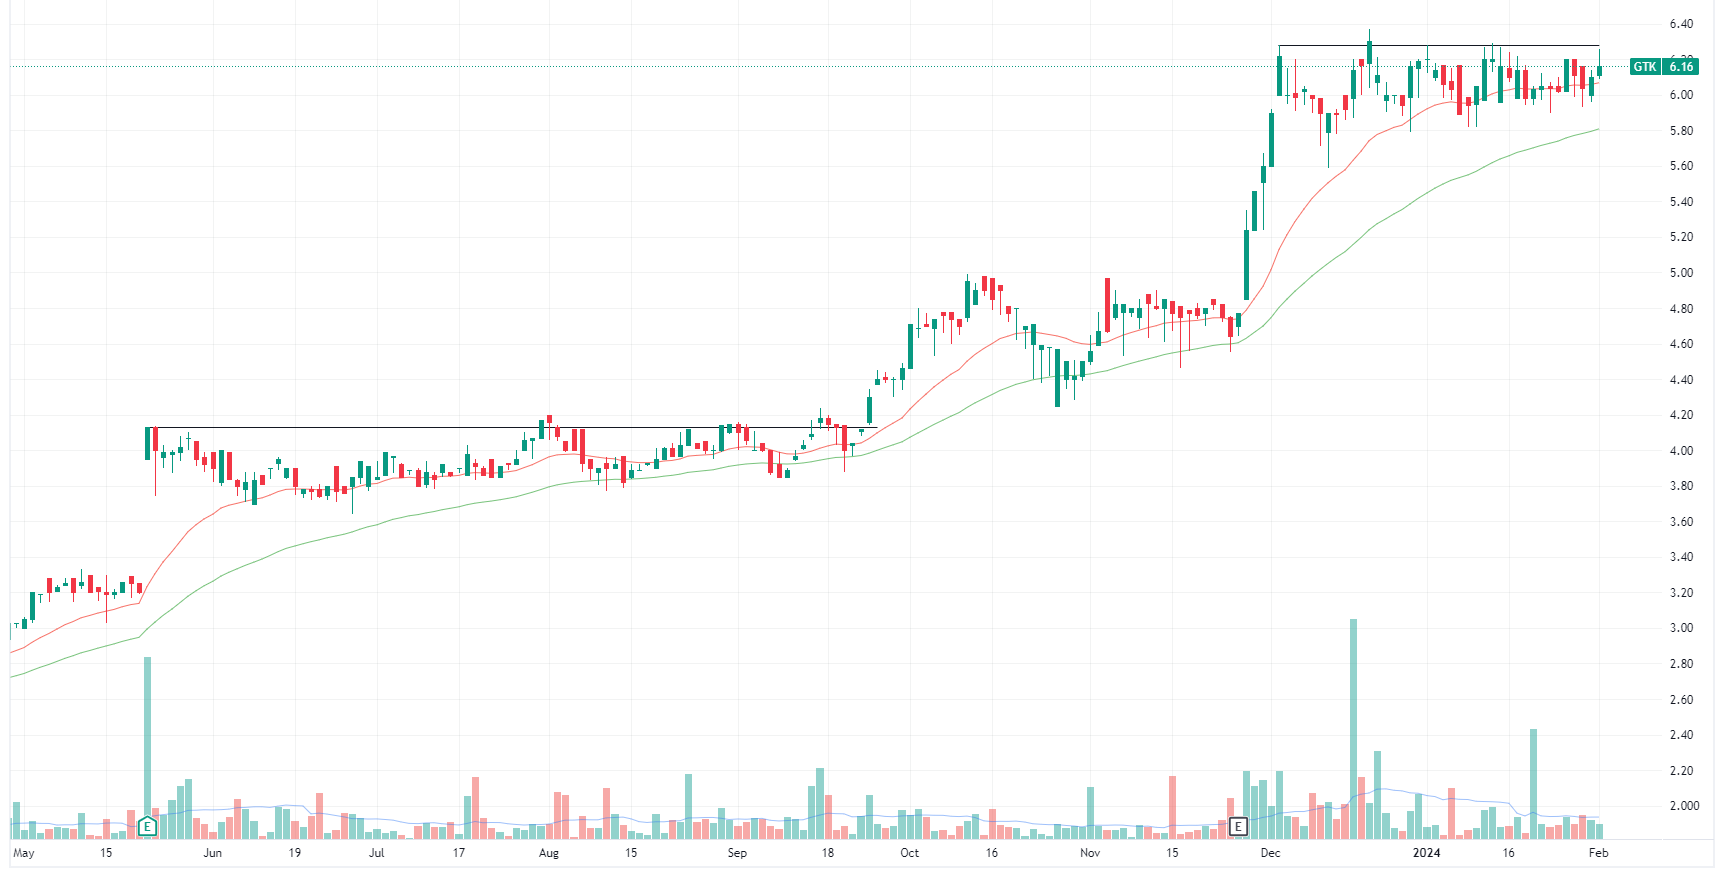 Gentrack daily chart (Source: TradingView)